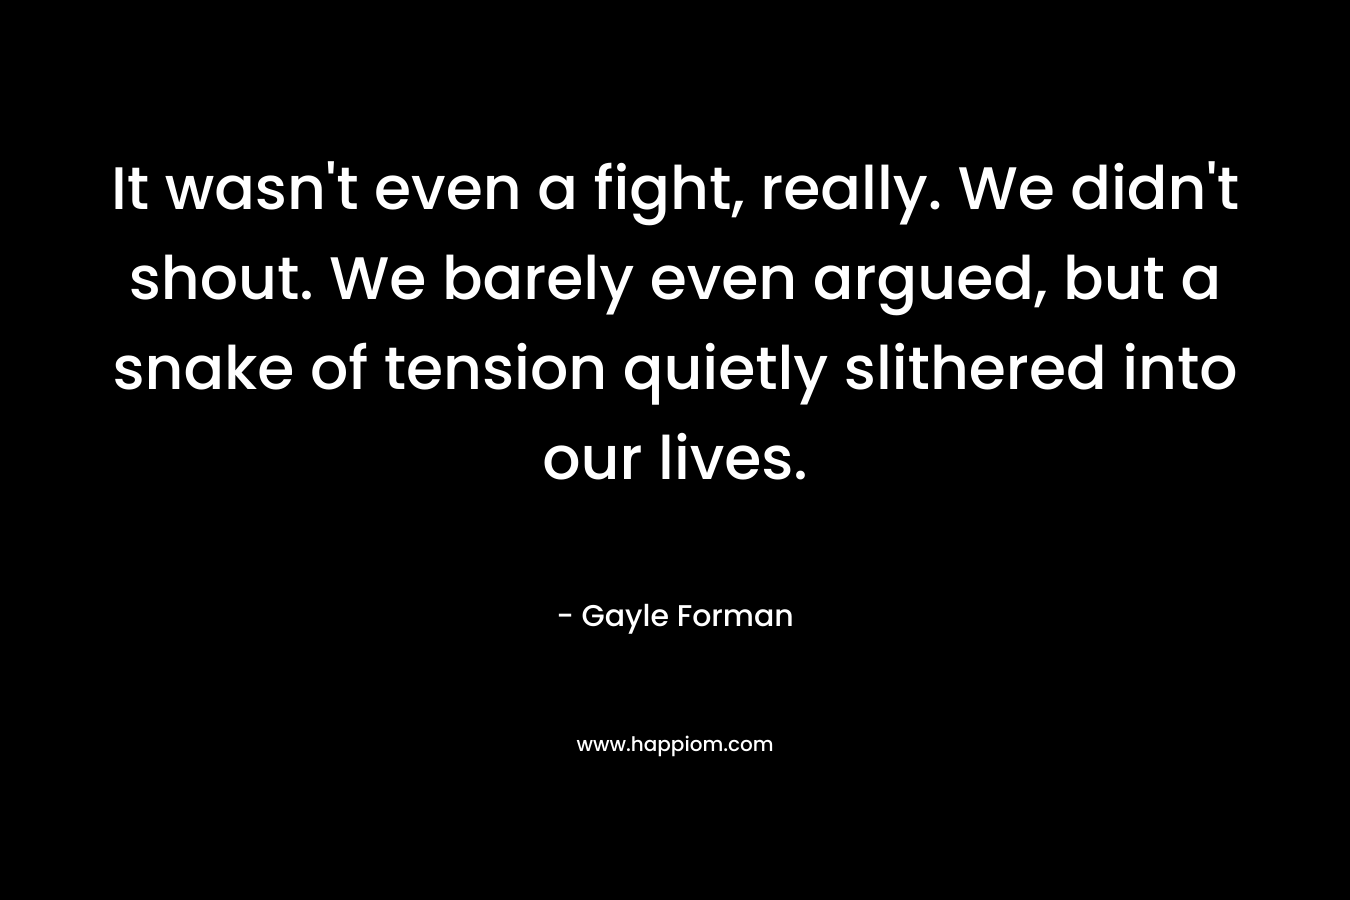 It wasn’t even a fight, really. We didn’t shout. We barely even argued, but a snake of tension quietly slithered into our lives. – Gayle Forman